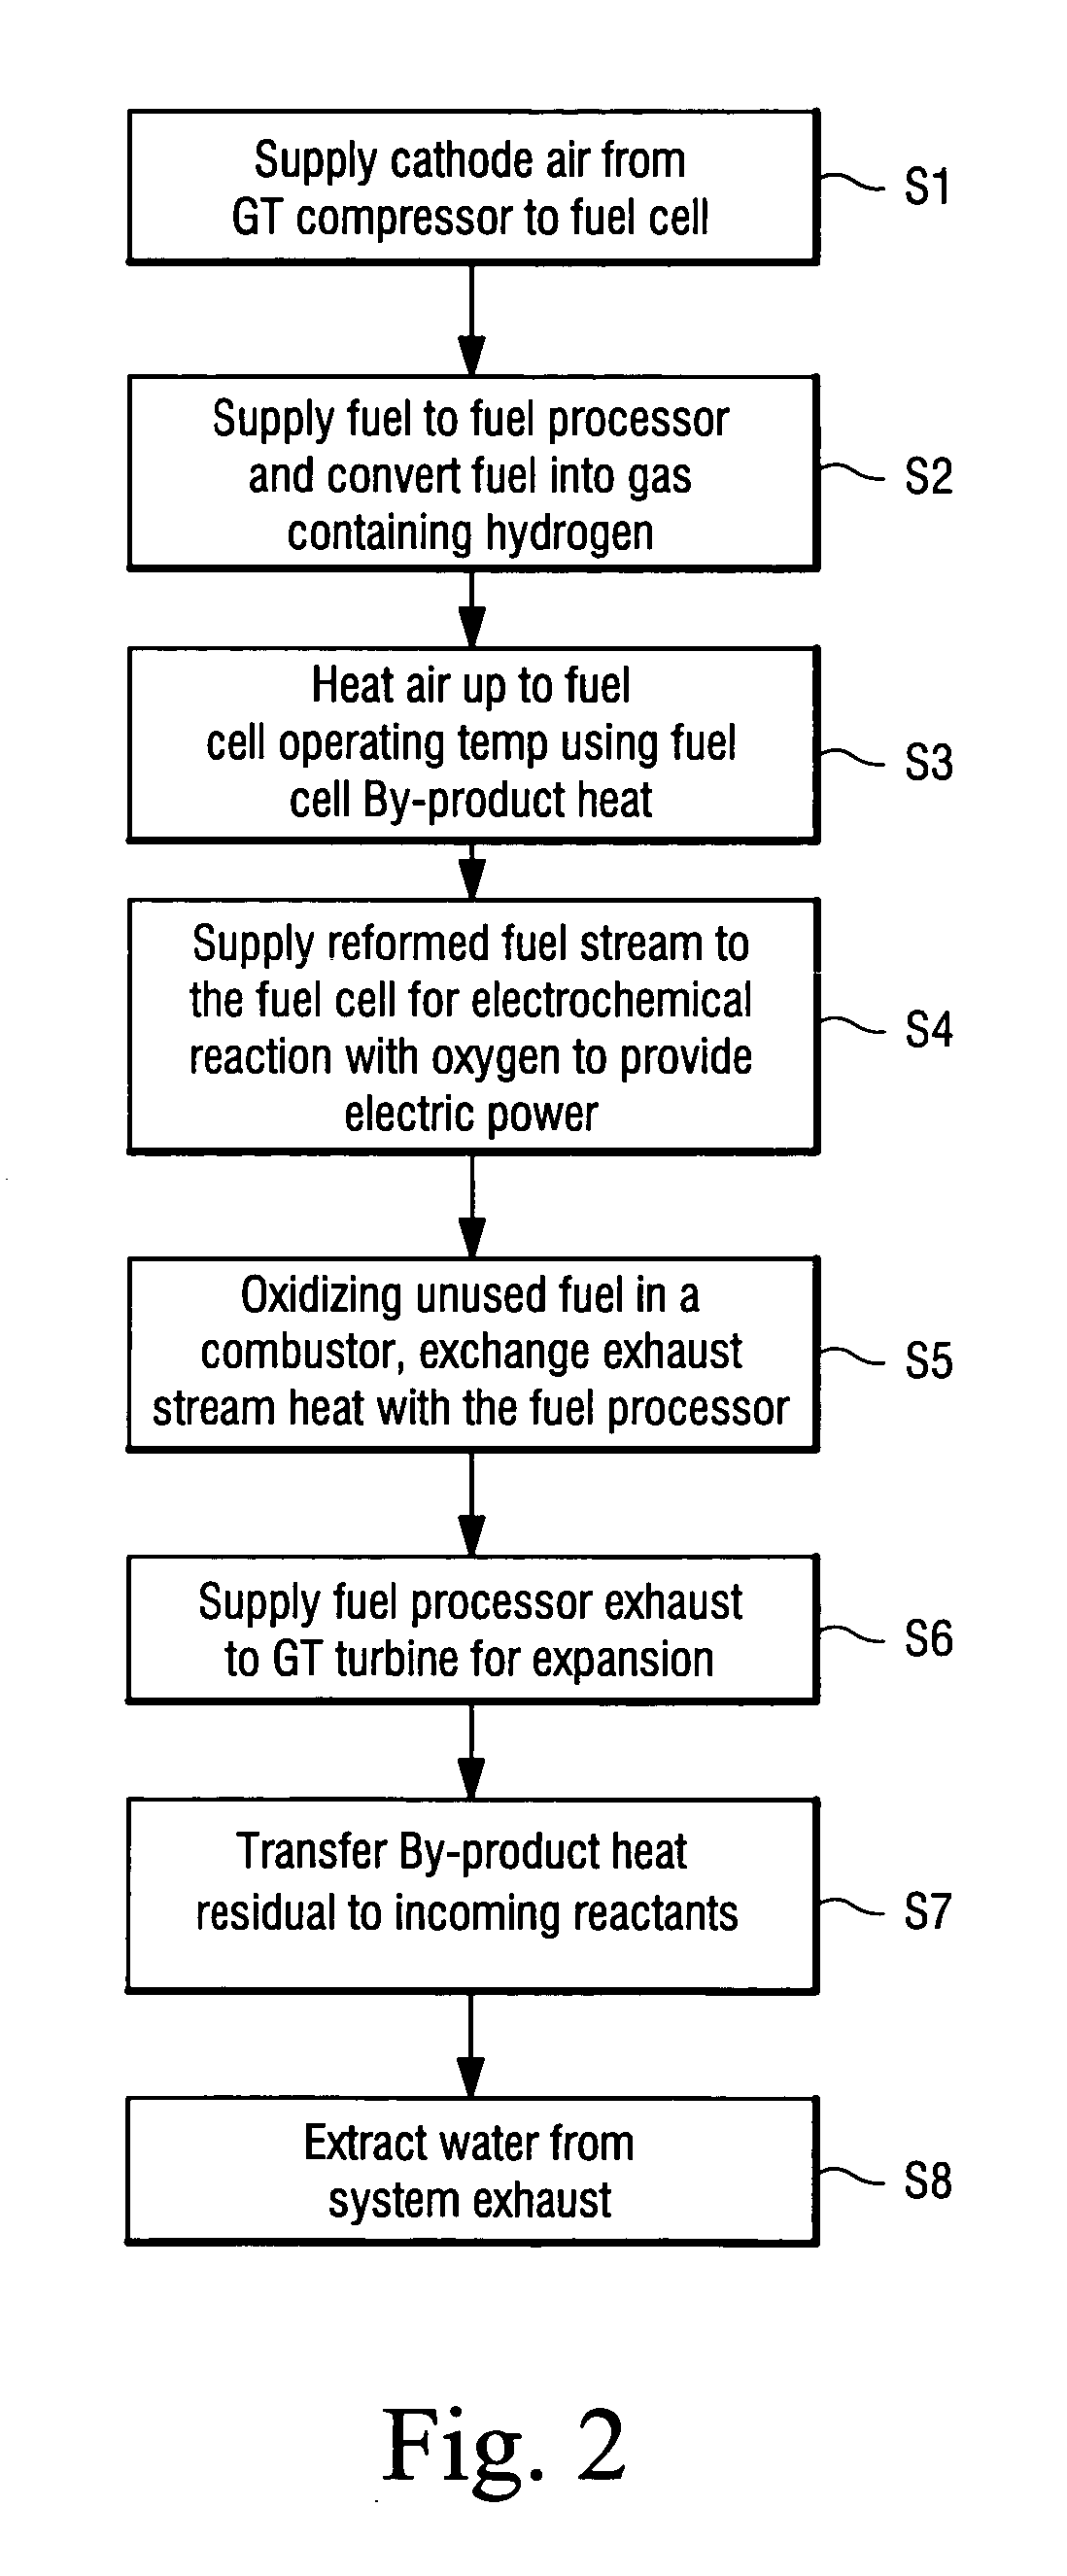 Pressurized near-isothermal fuel cell - gas turbine hybrid system